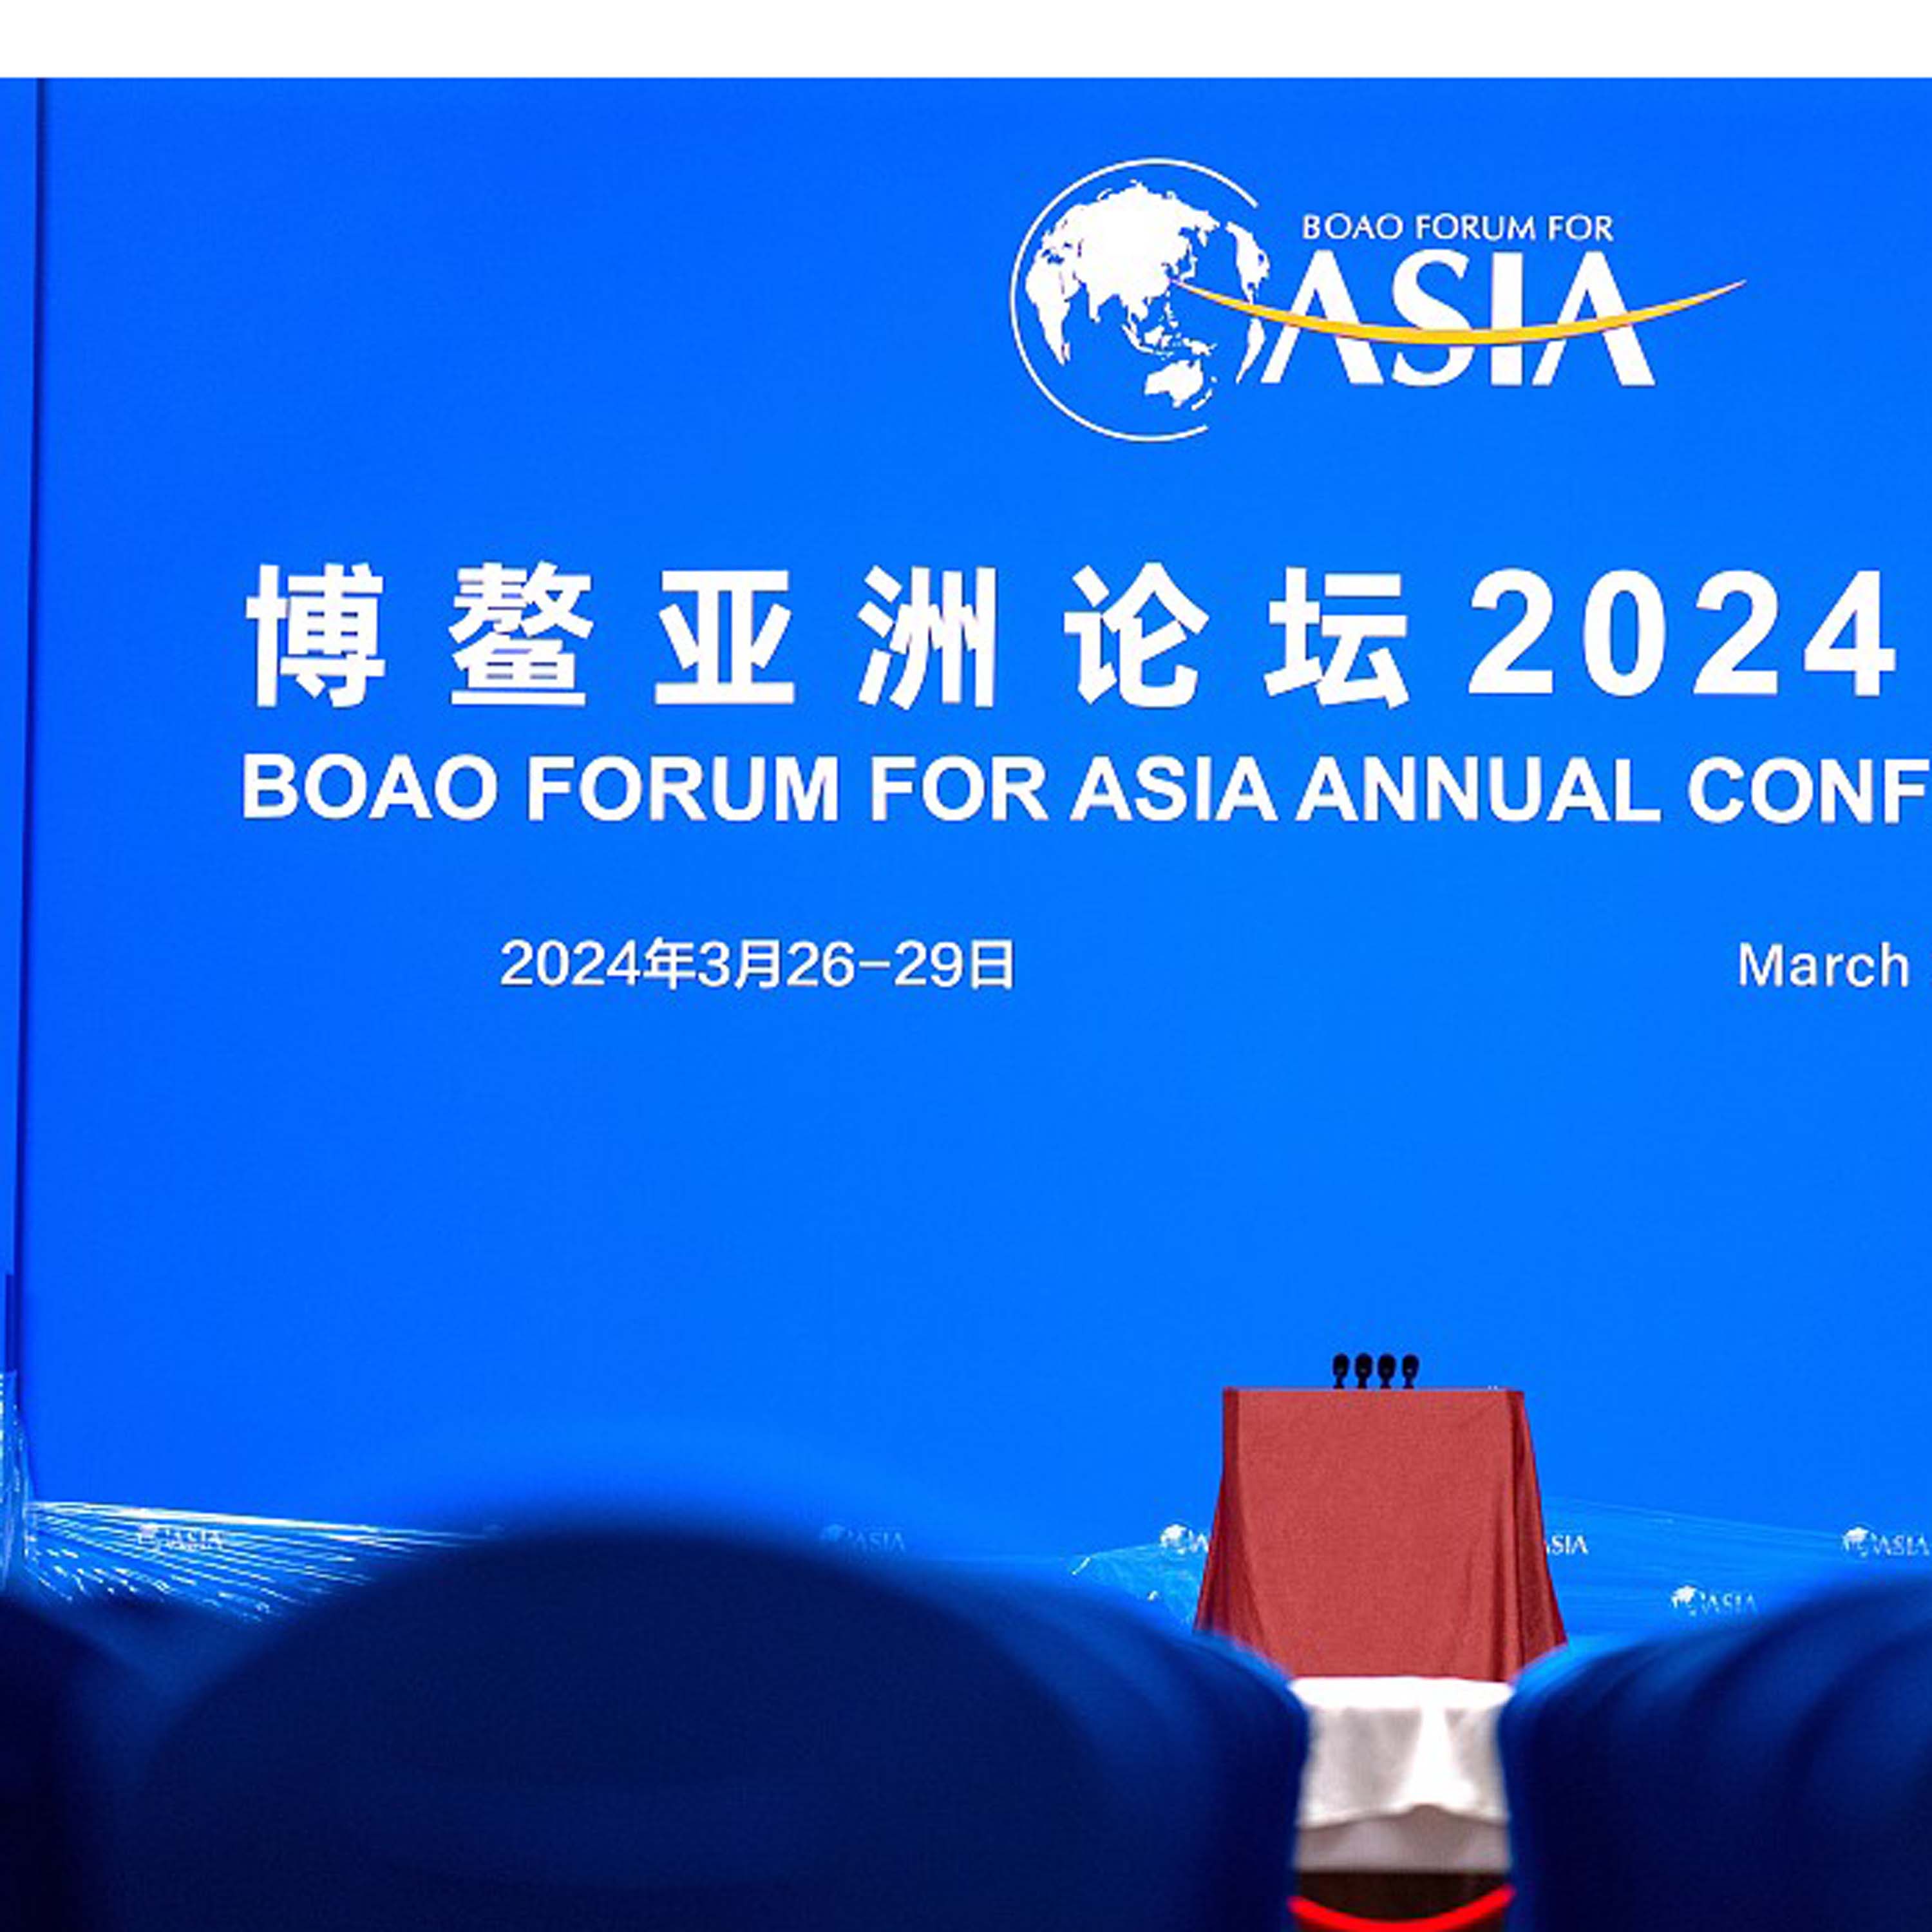 Boao Forum 2024 concludes in Hainan